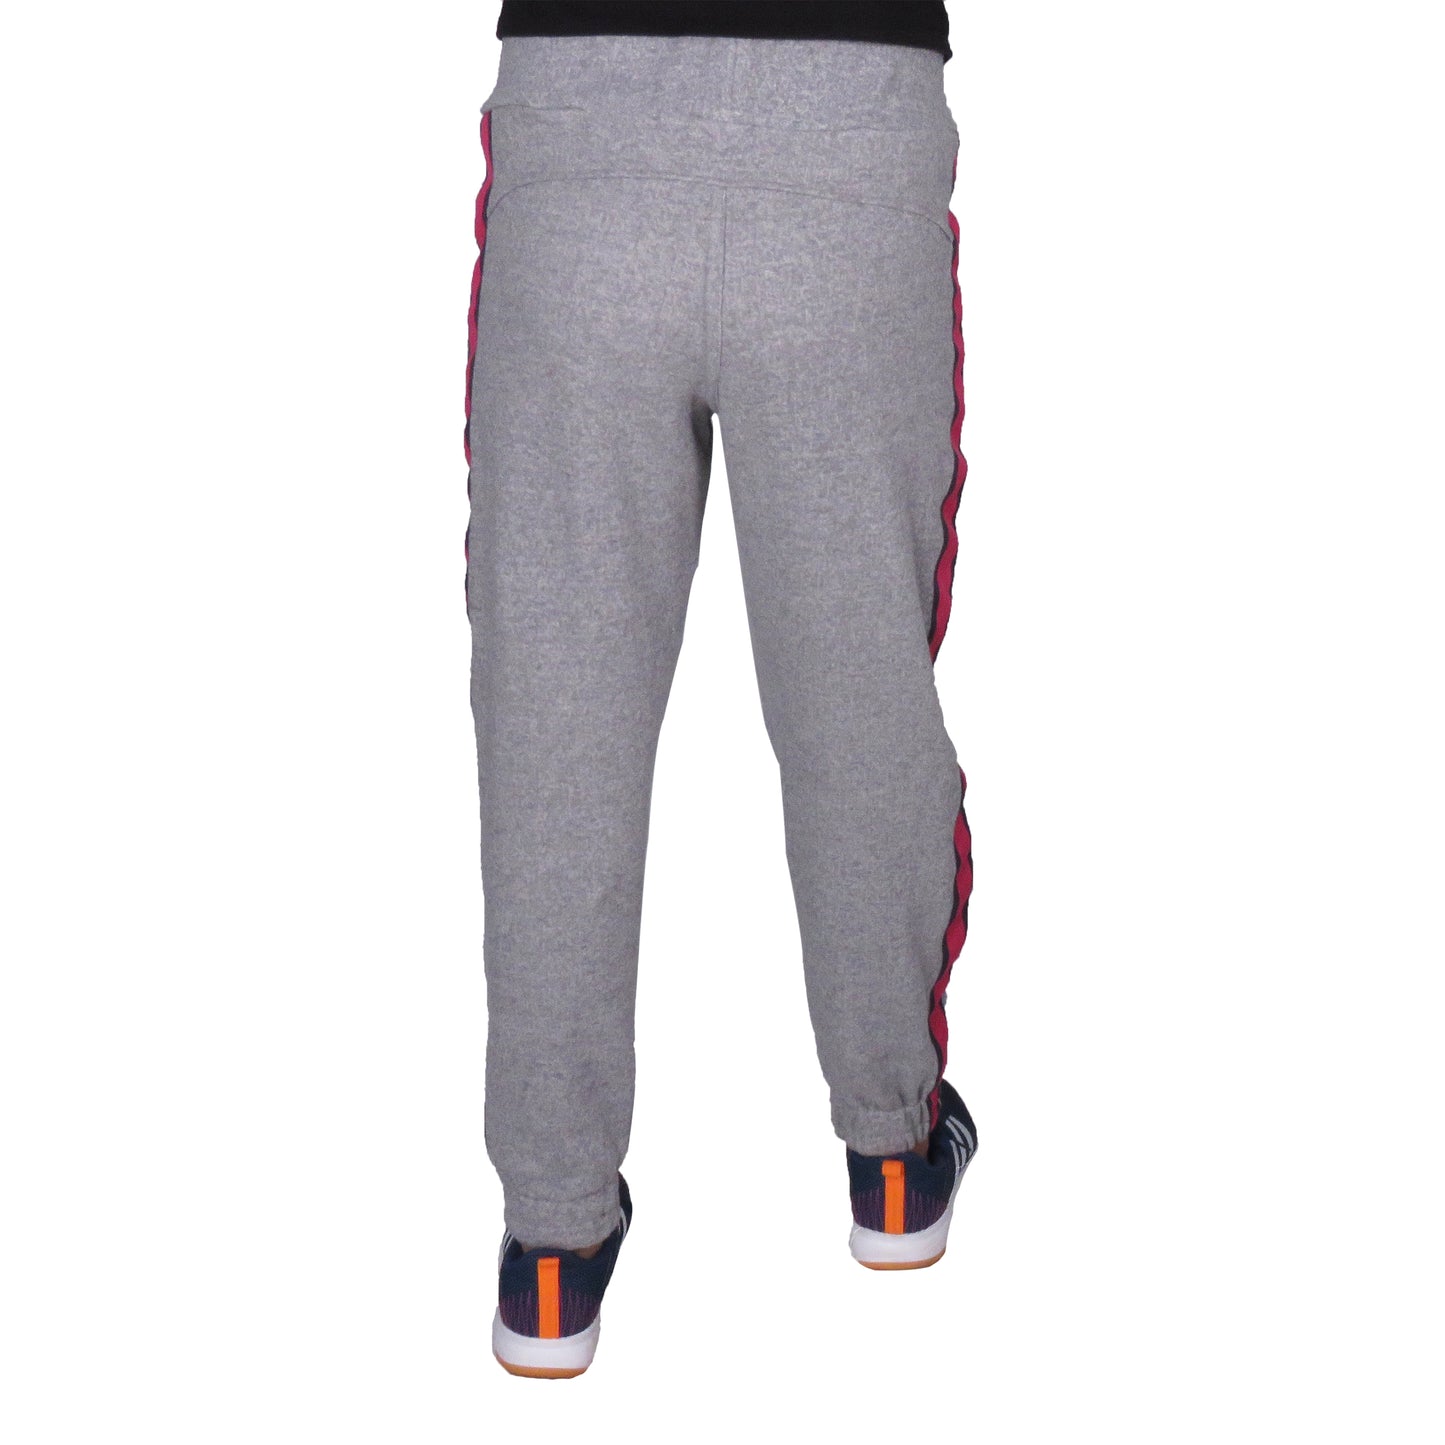 Dark Speckled Grey Knitted Joggers With Pockets